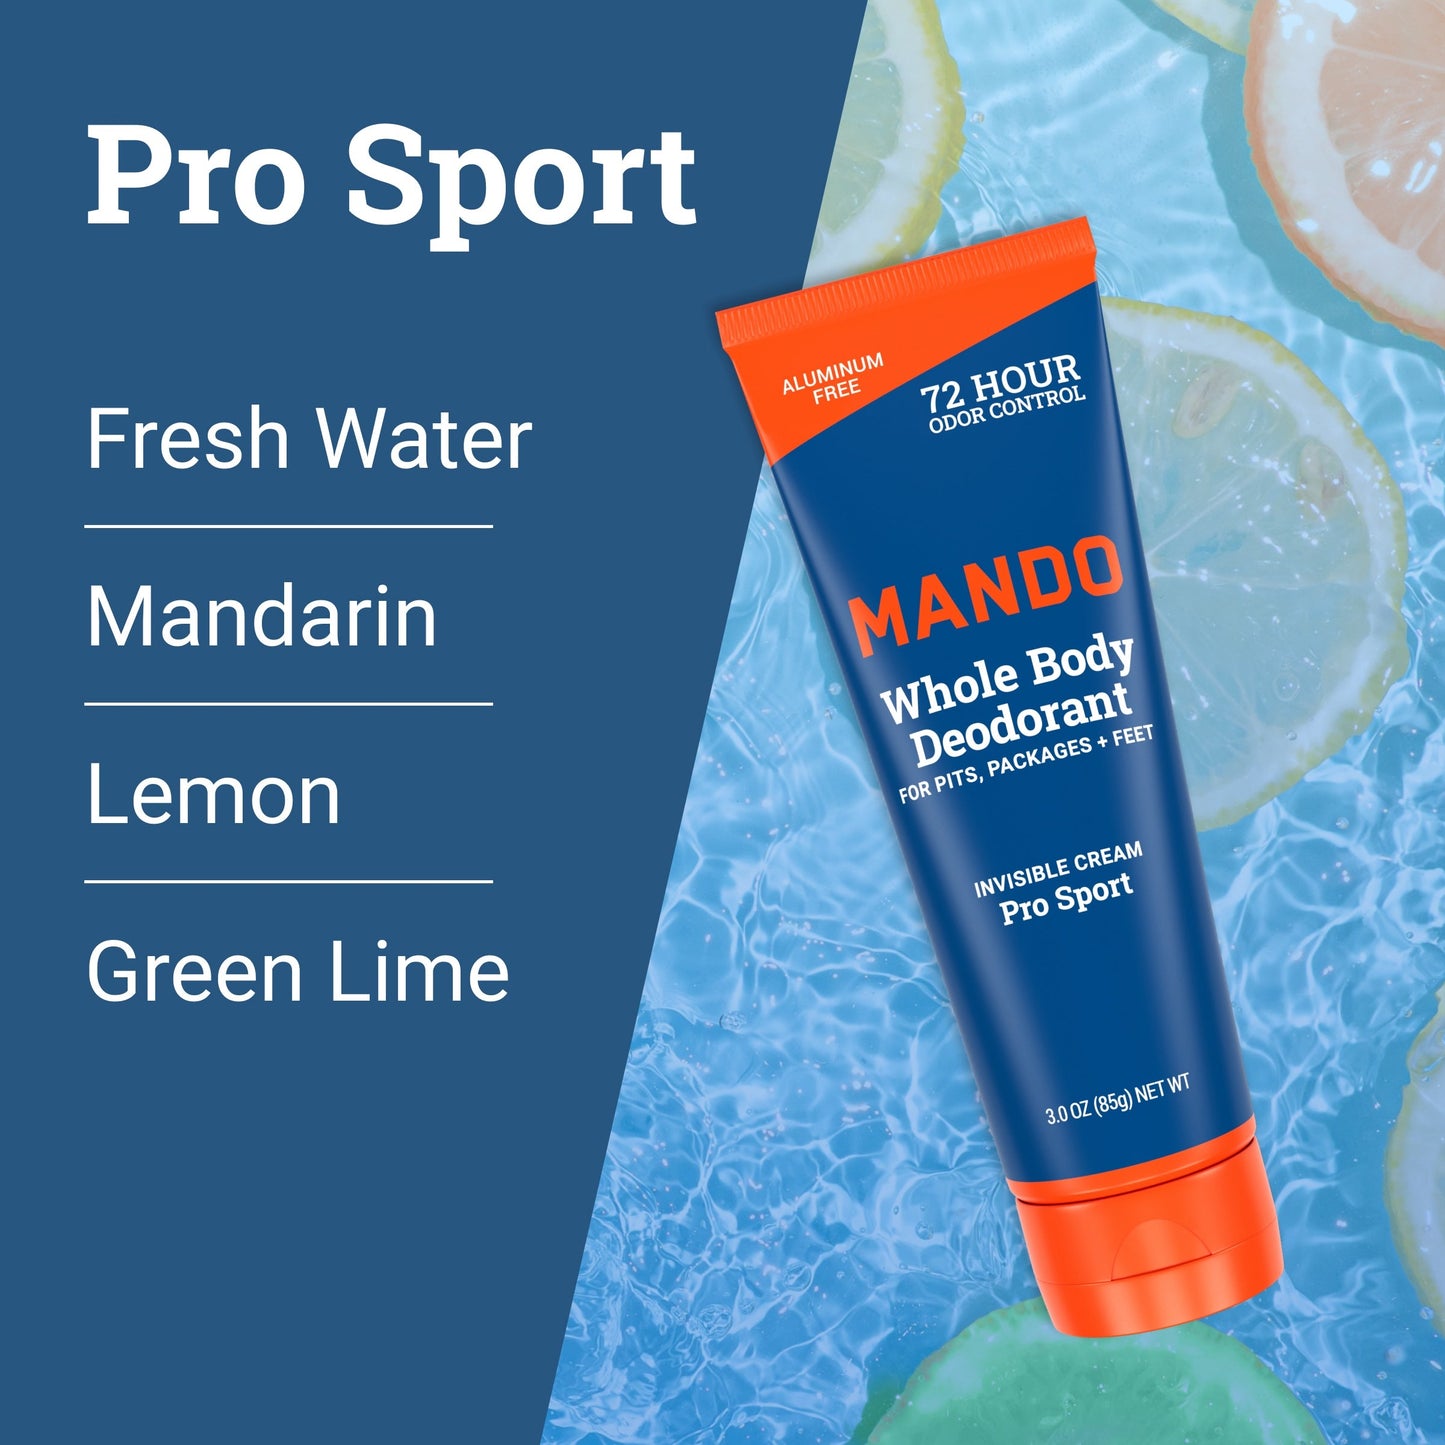 Mando invisible cream deodorant in Pro sport scent with text: fresh water, mandarin, lemon, green lime